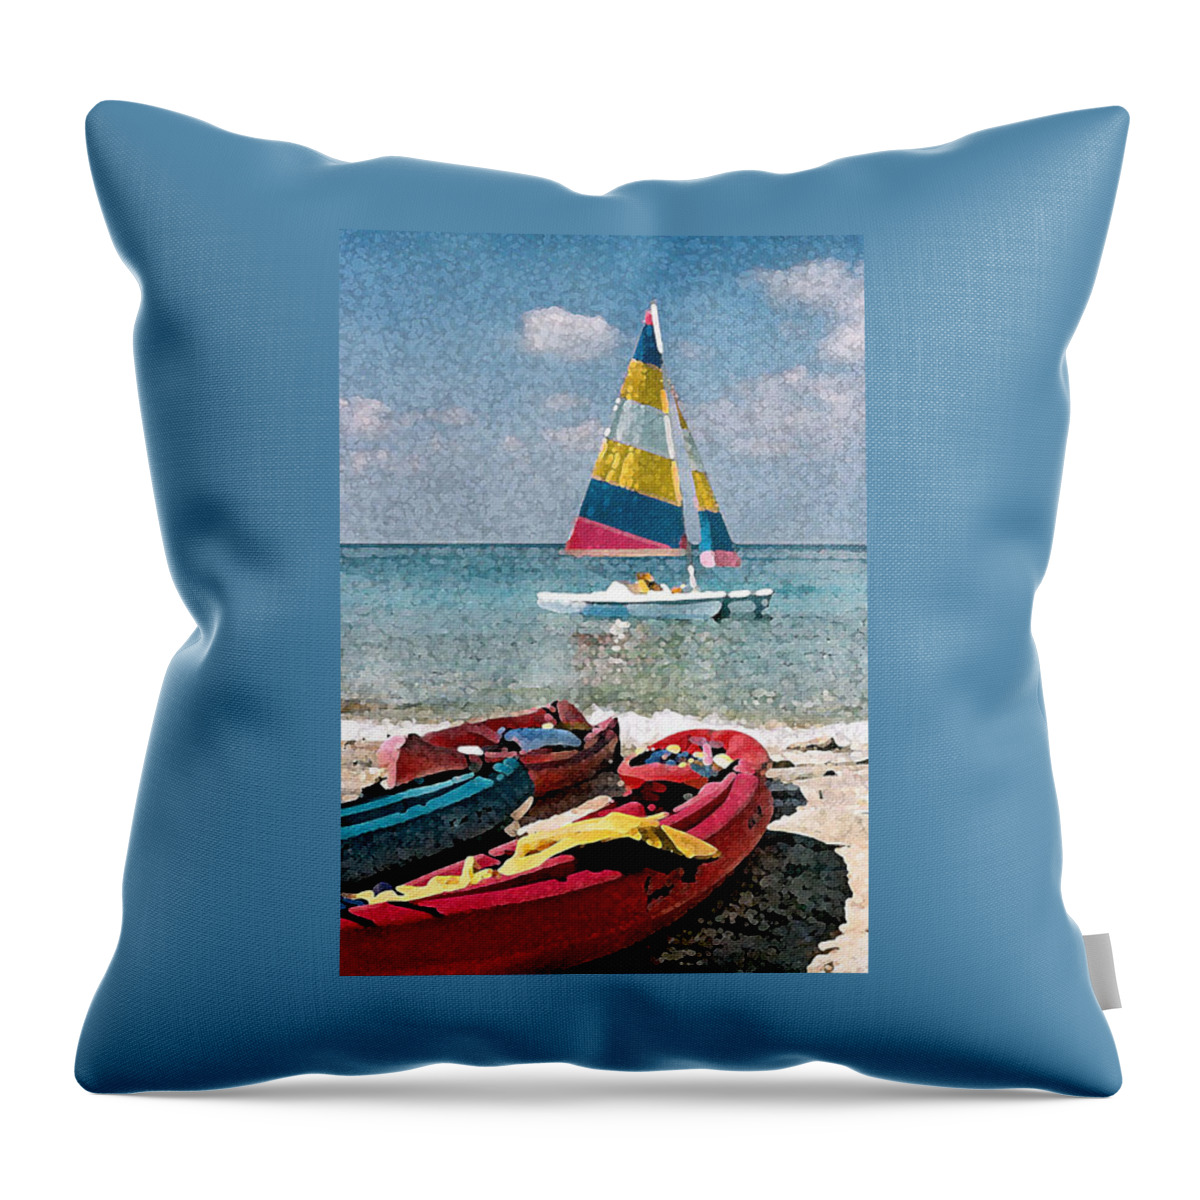 Digital Watercolor Throw Pillow featuring the digital art Boats on the Cay by Donna Corless